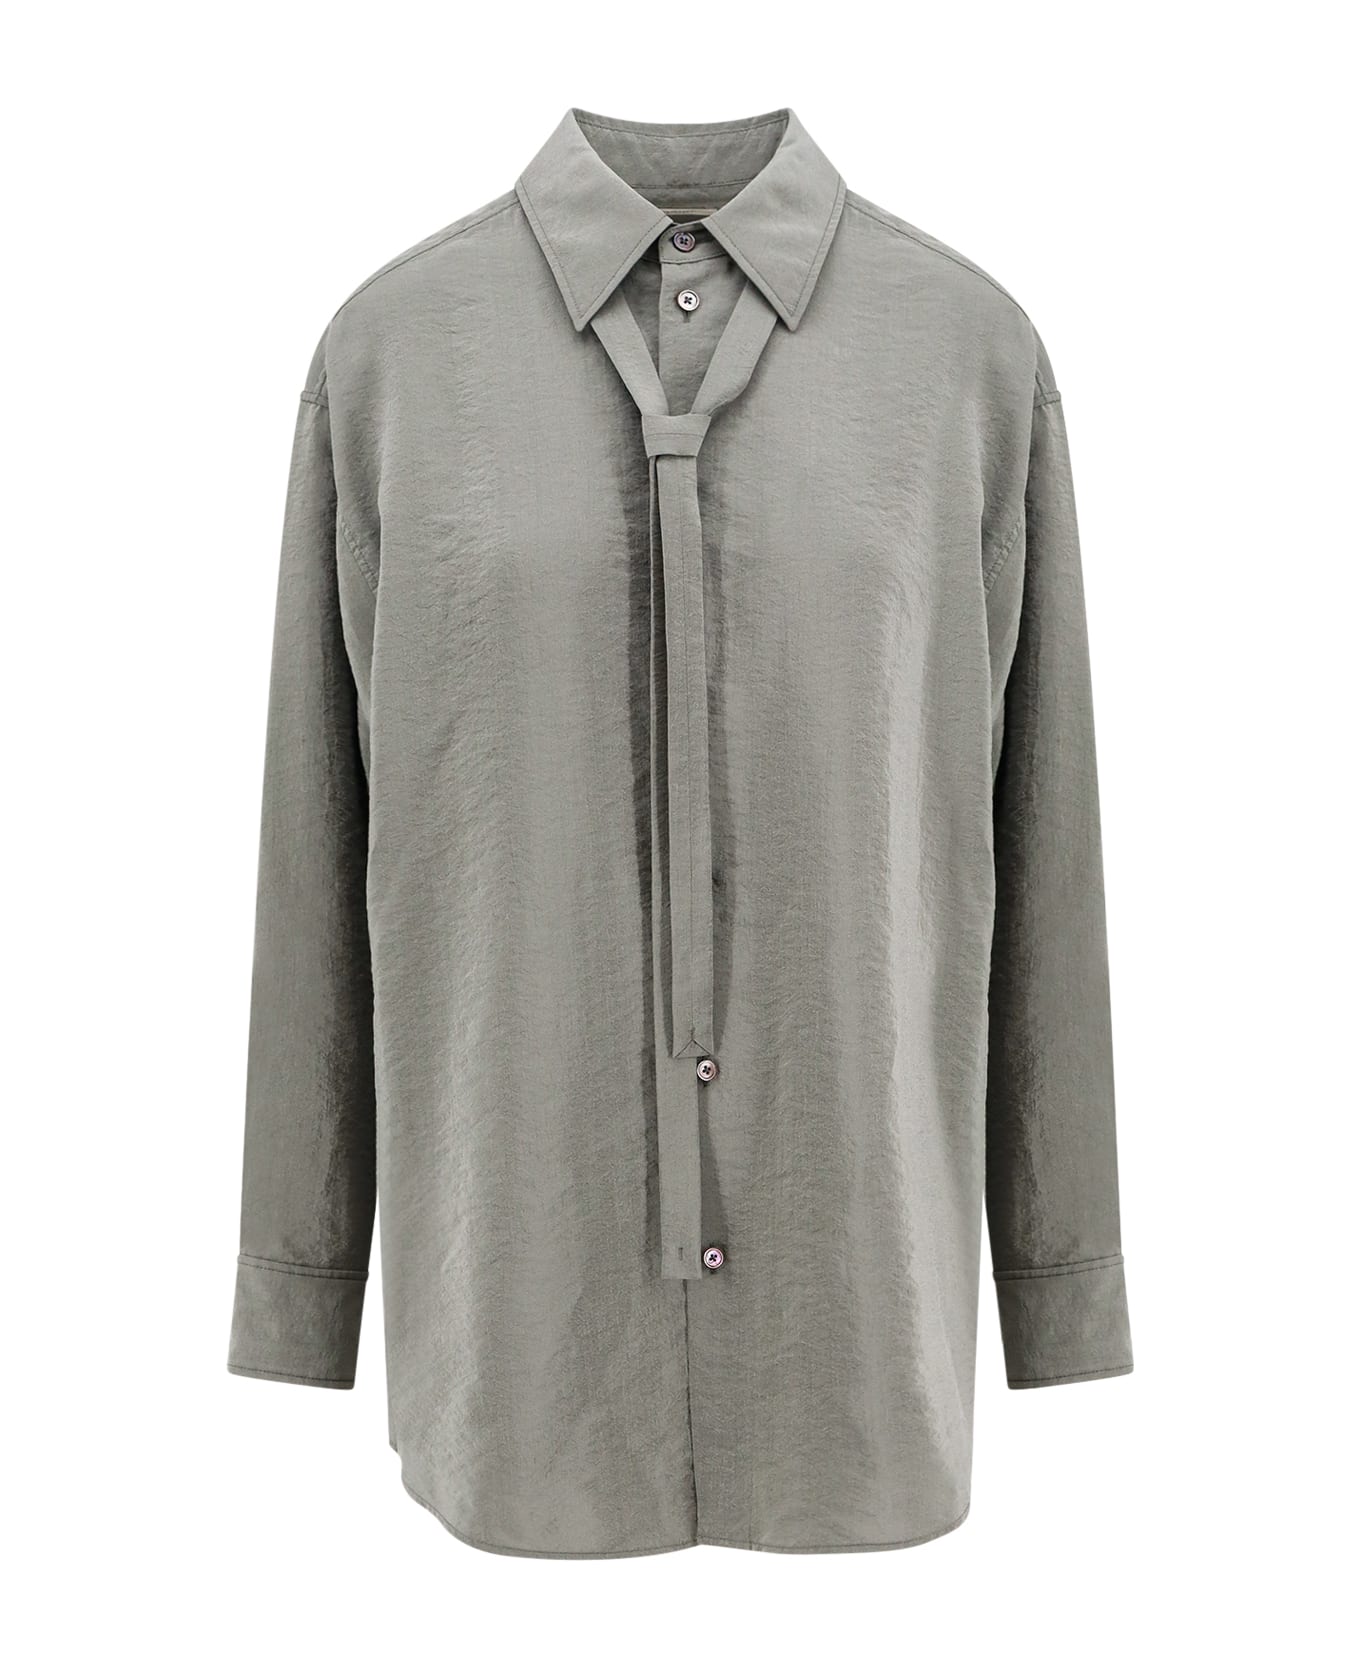 Lemaire Shirt - Grey シャツ